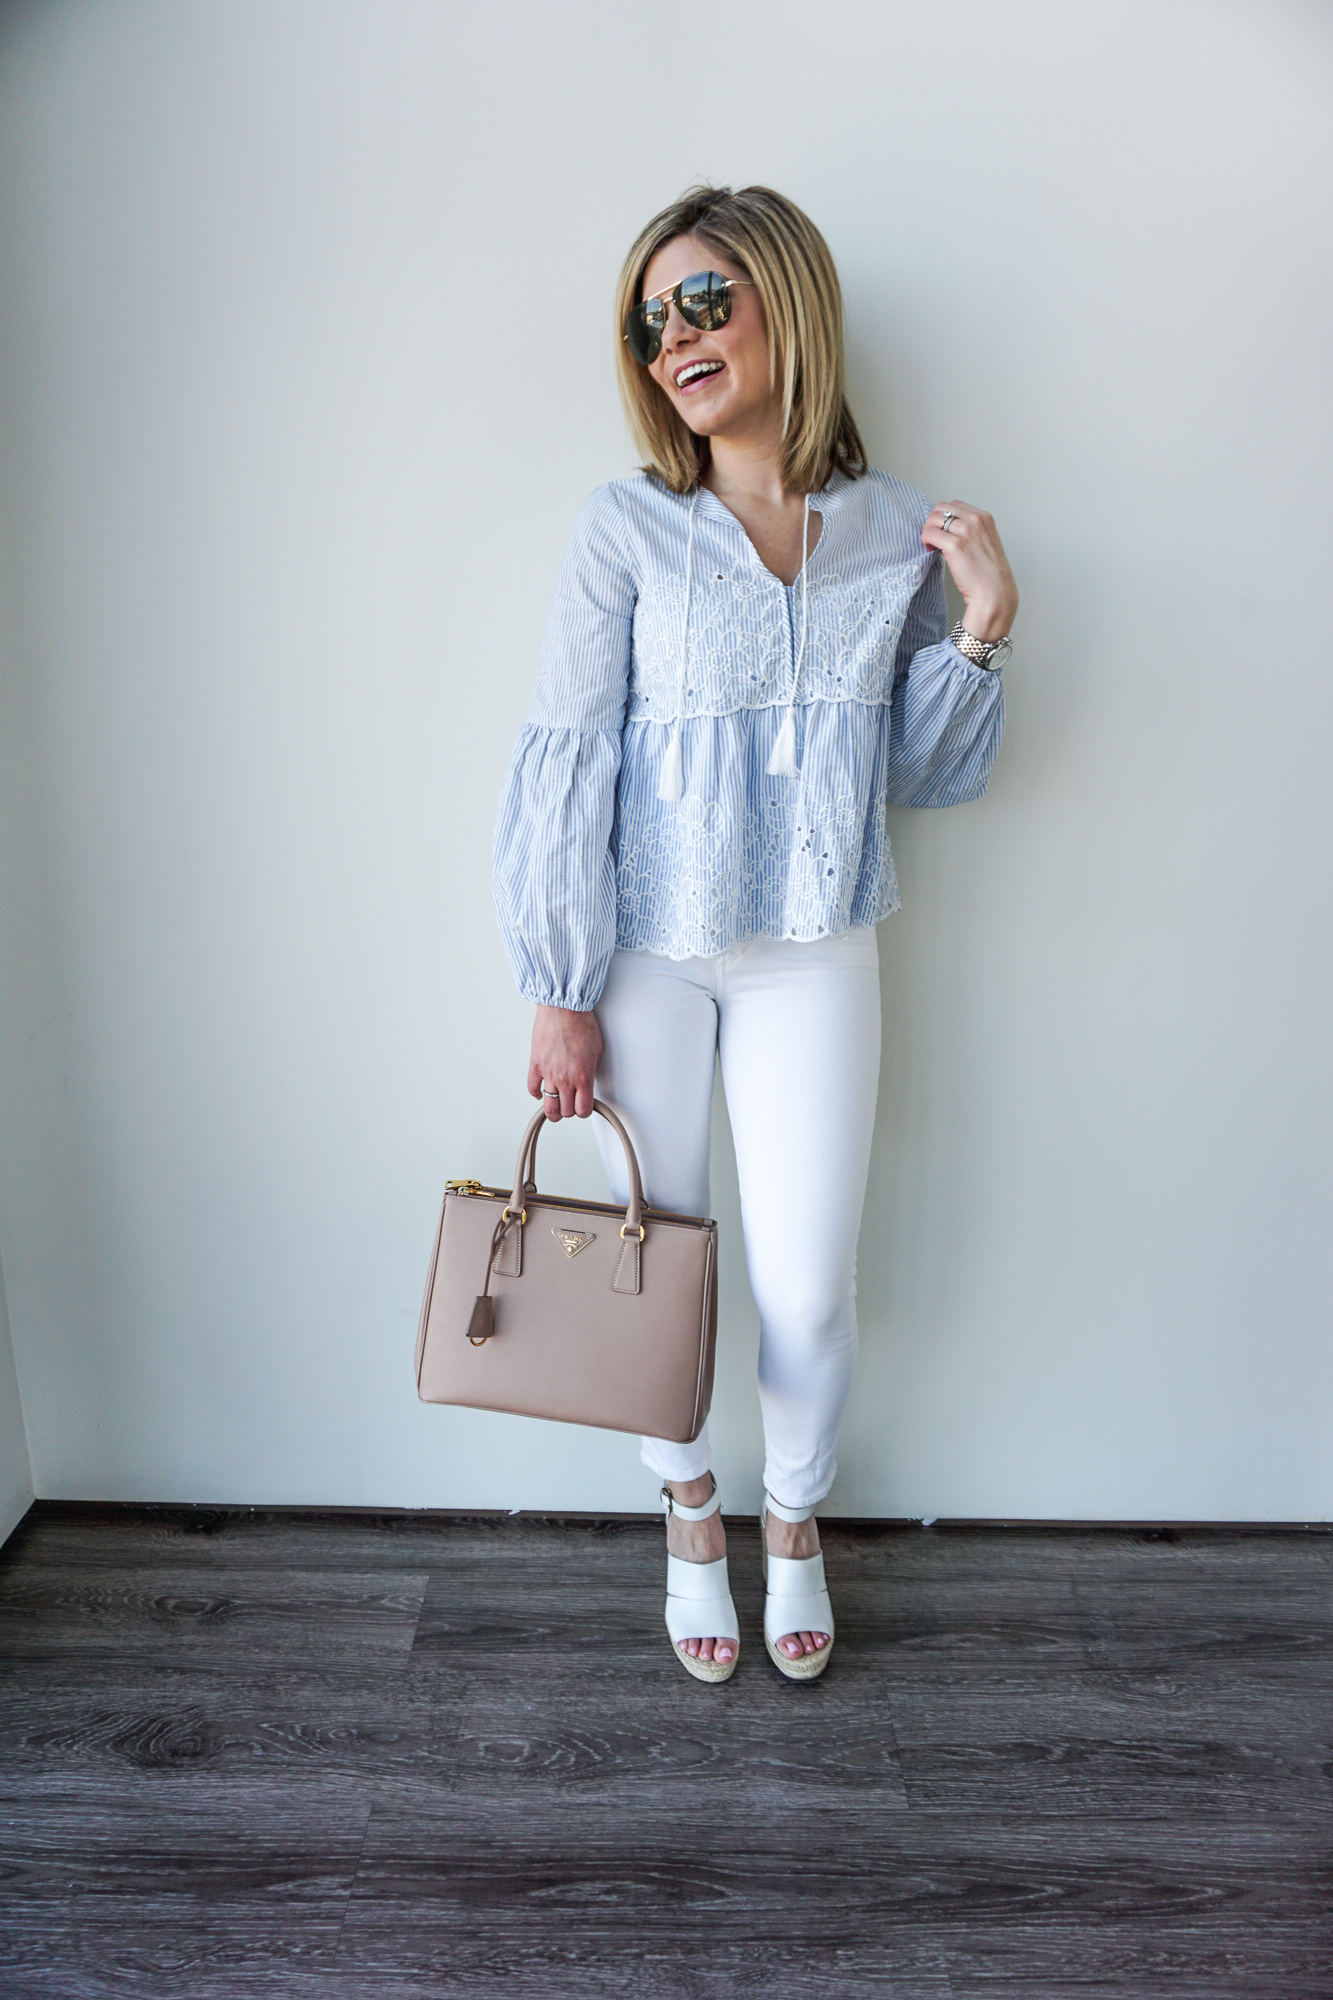 eyelet top and white jeans